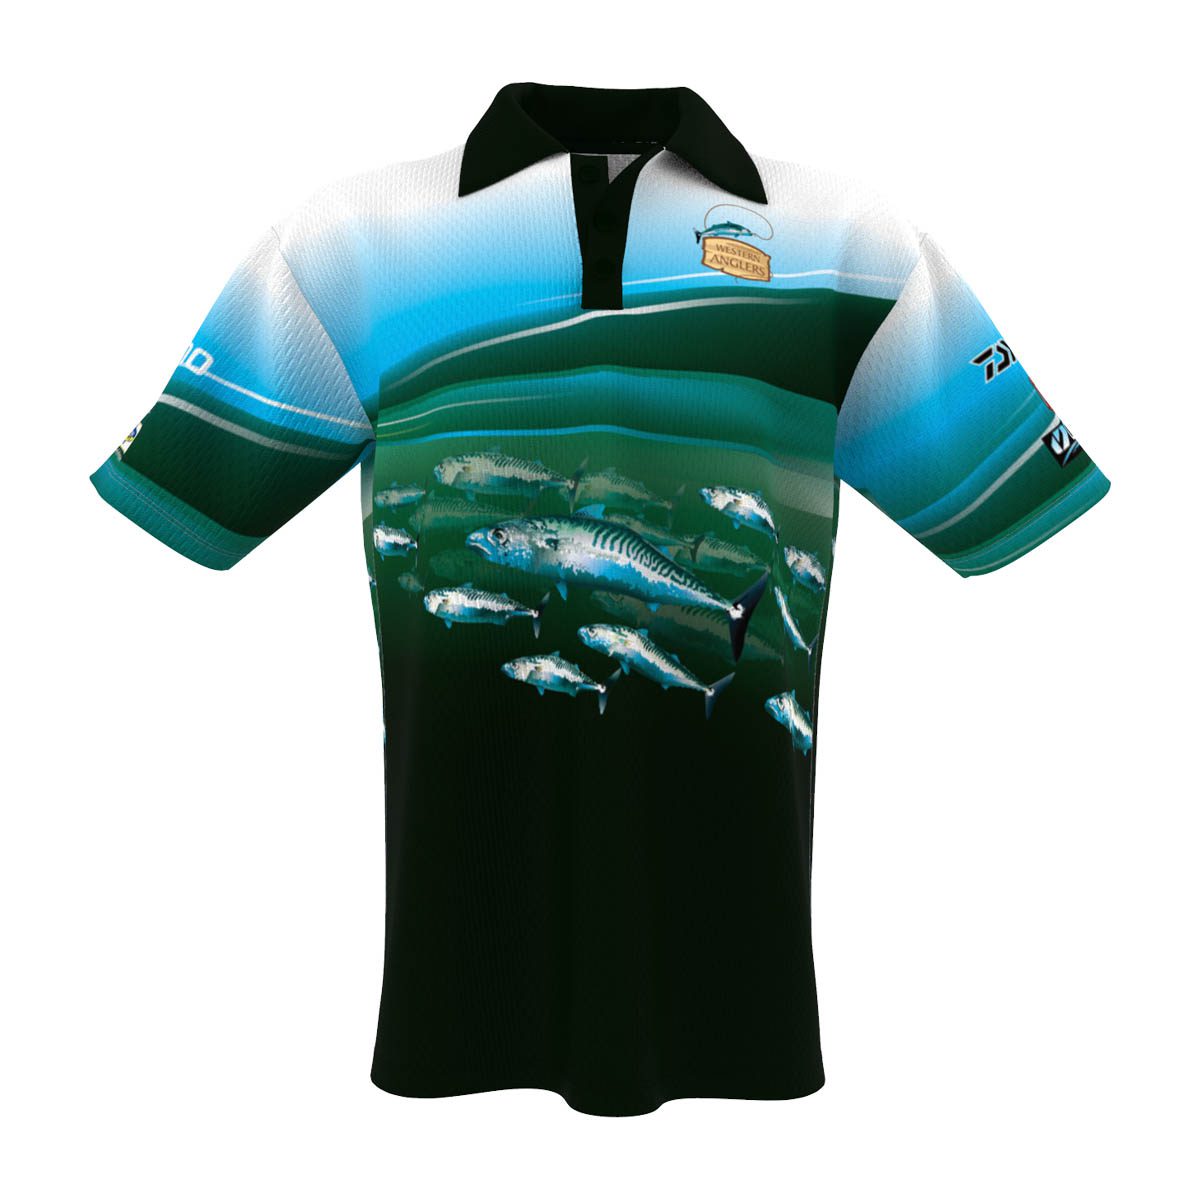 make your own fishing jersey